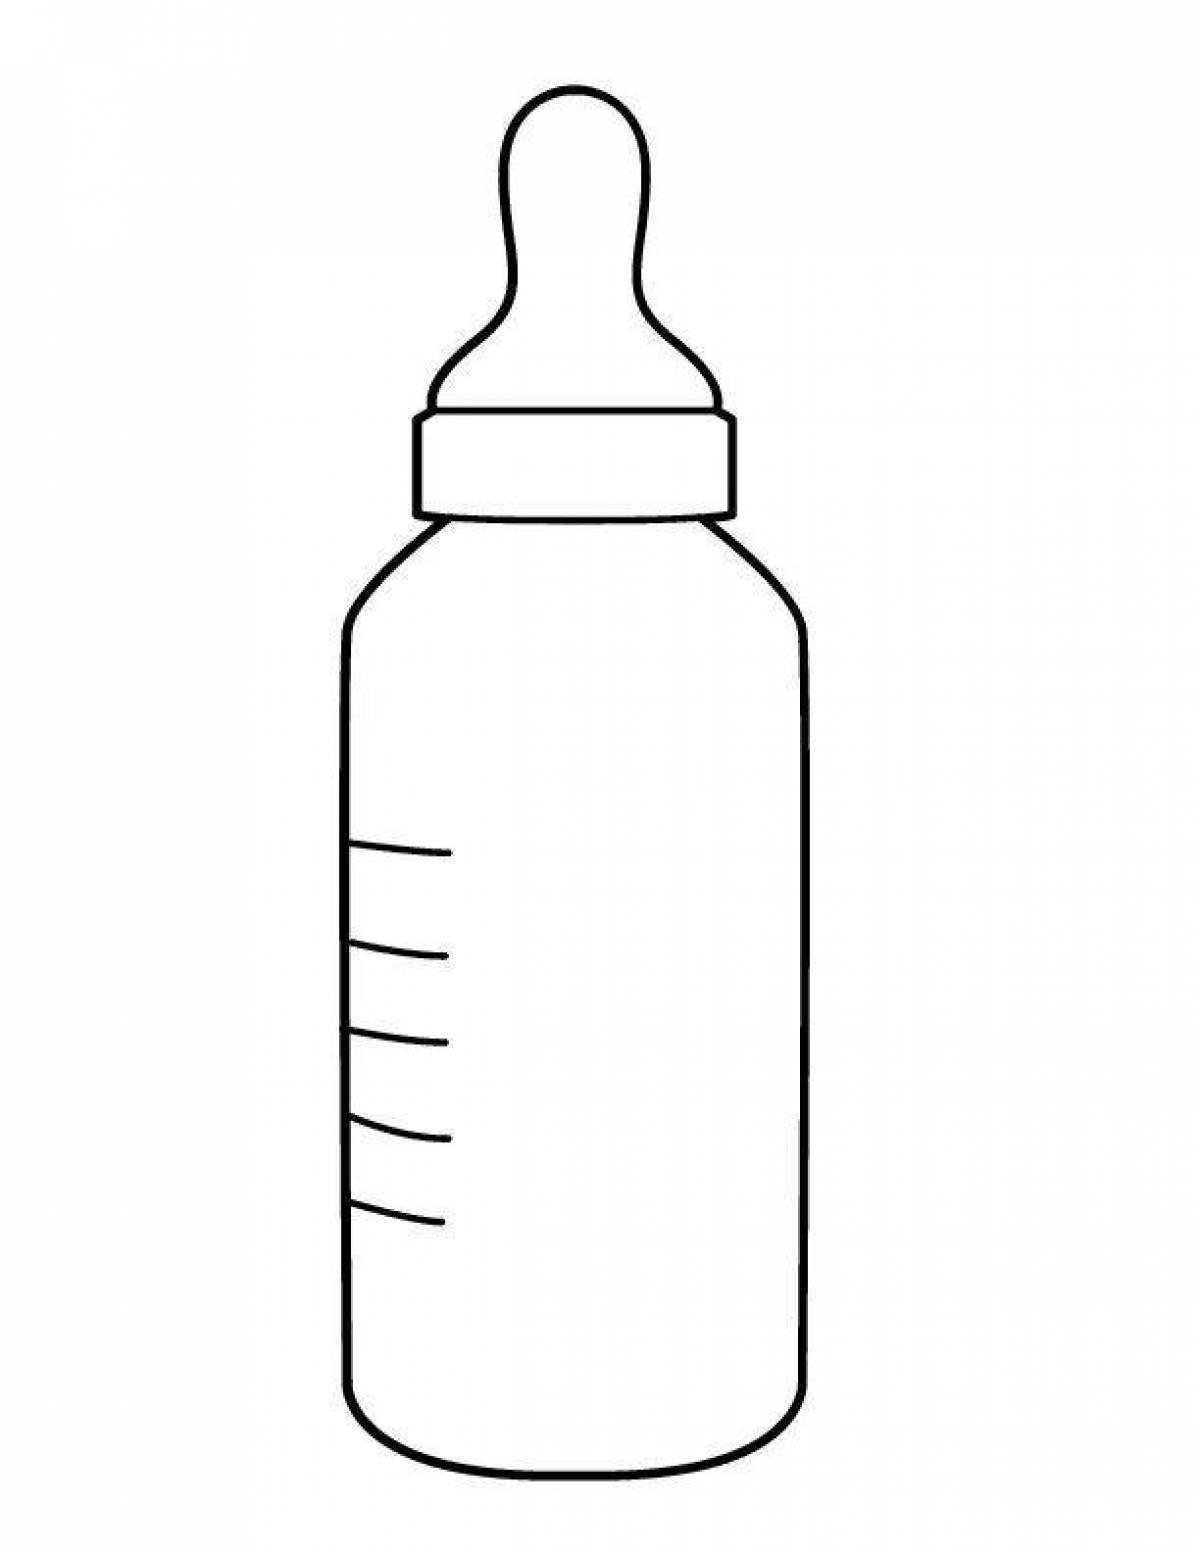 Adorable bottle coloring page